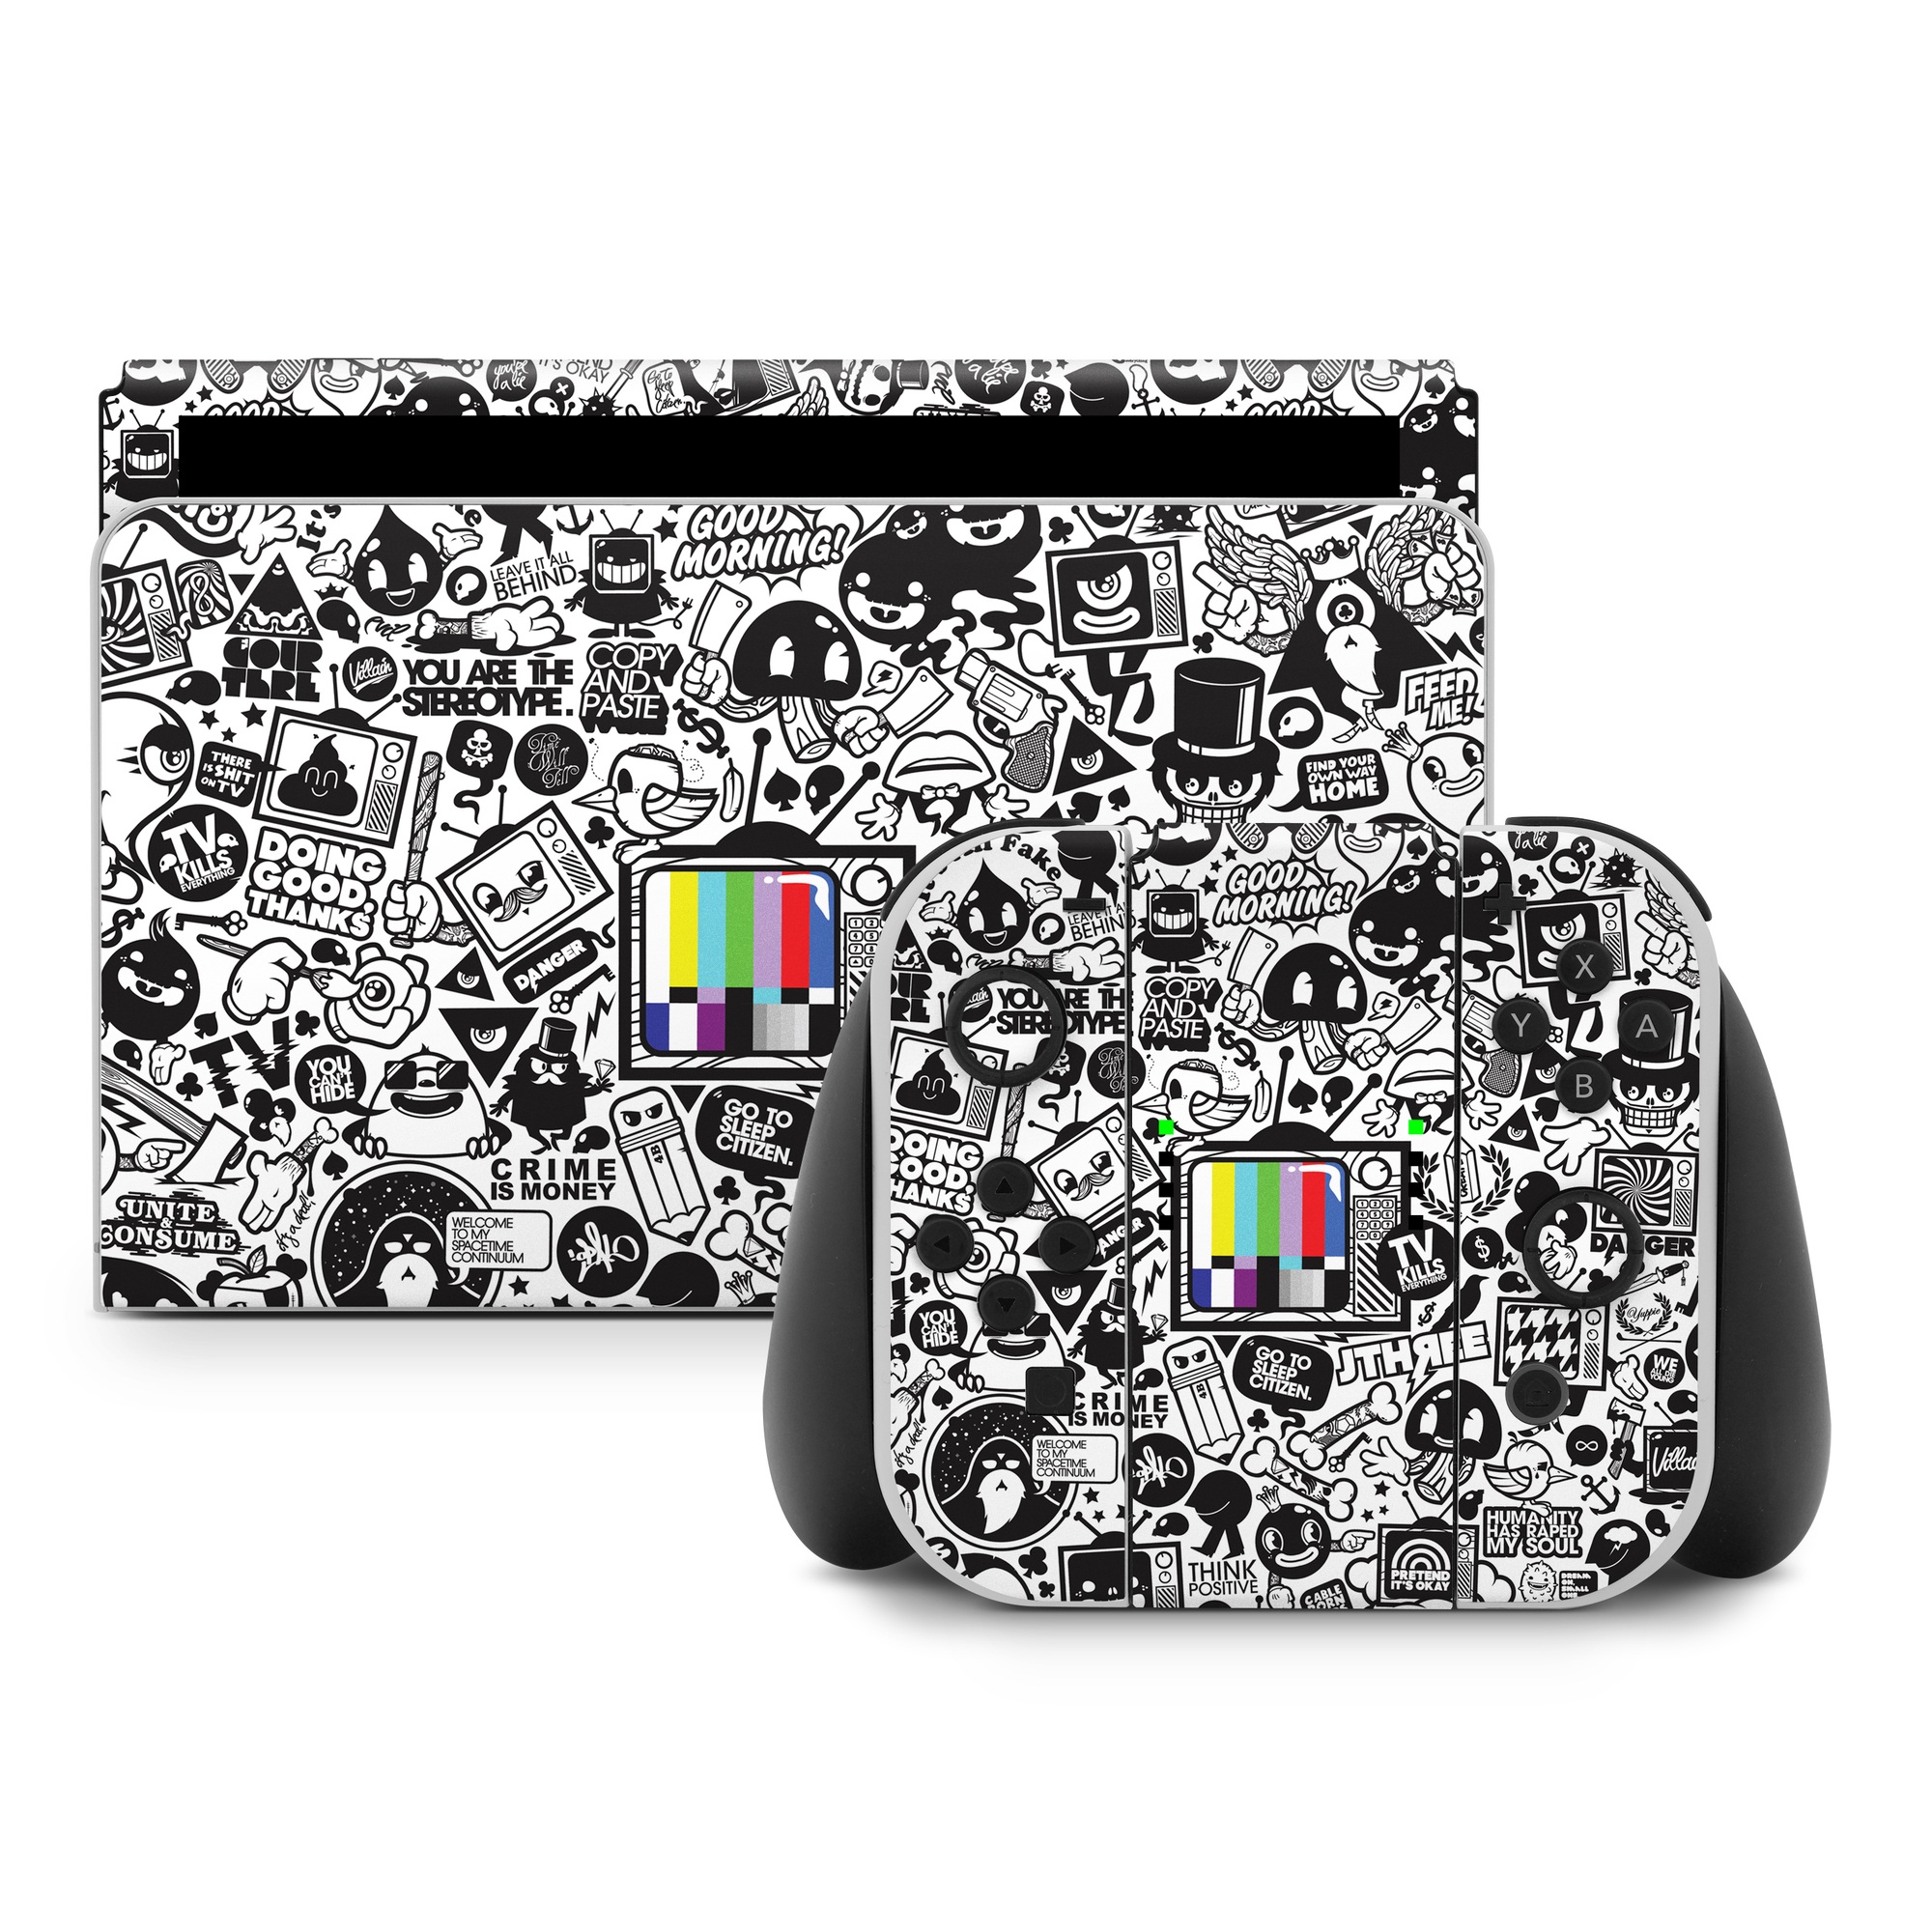 Nintendo Switch Skin design of Pattern, Drawing, Doodle, Design, Visual arts, Font, Black-and-white, Monochrome, Illustration, Art, with gray, black, white colors